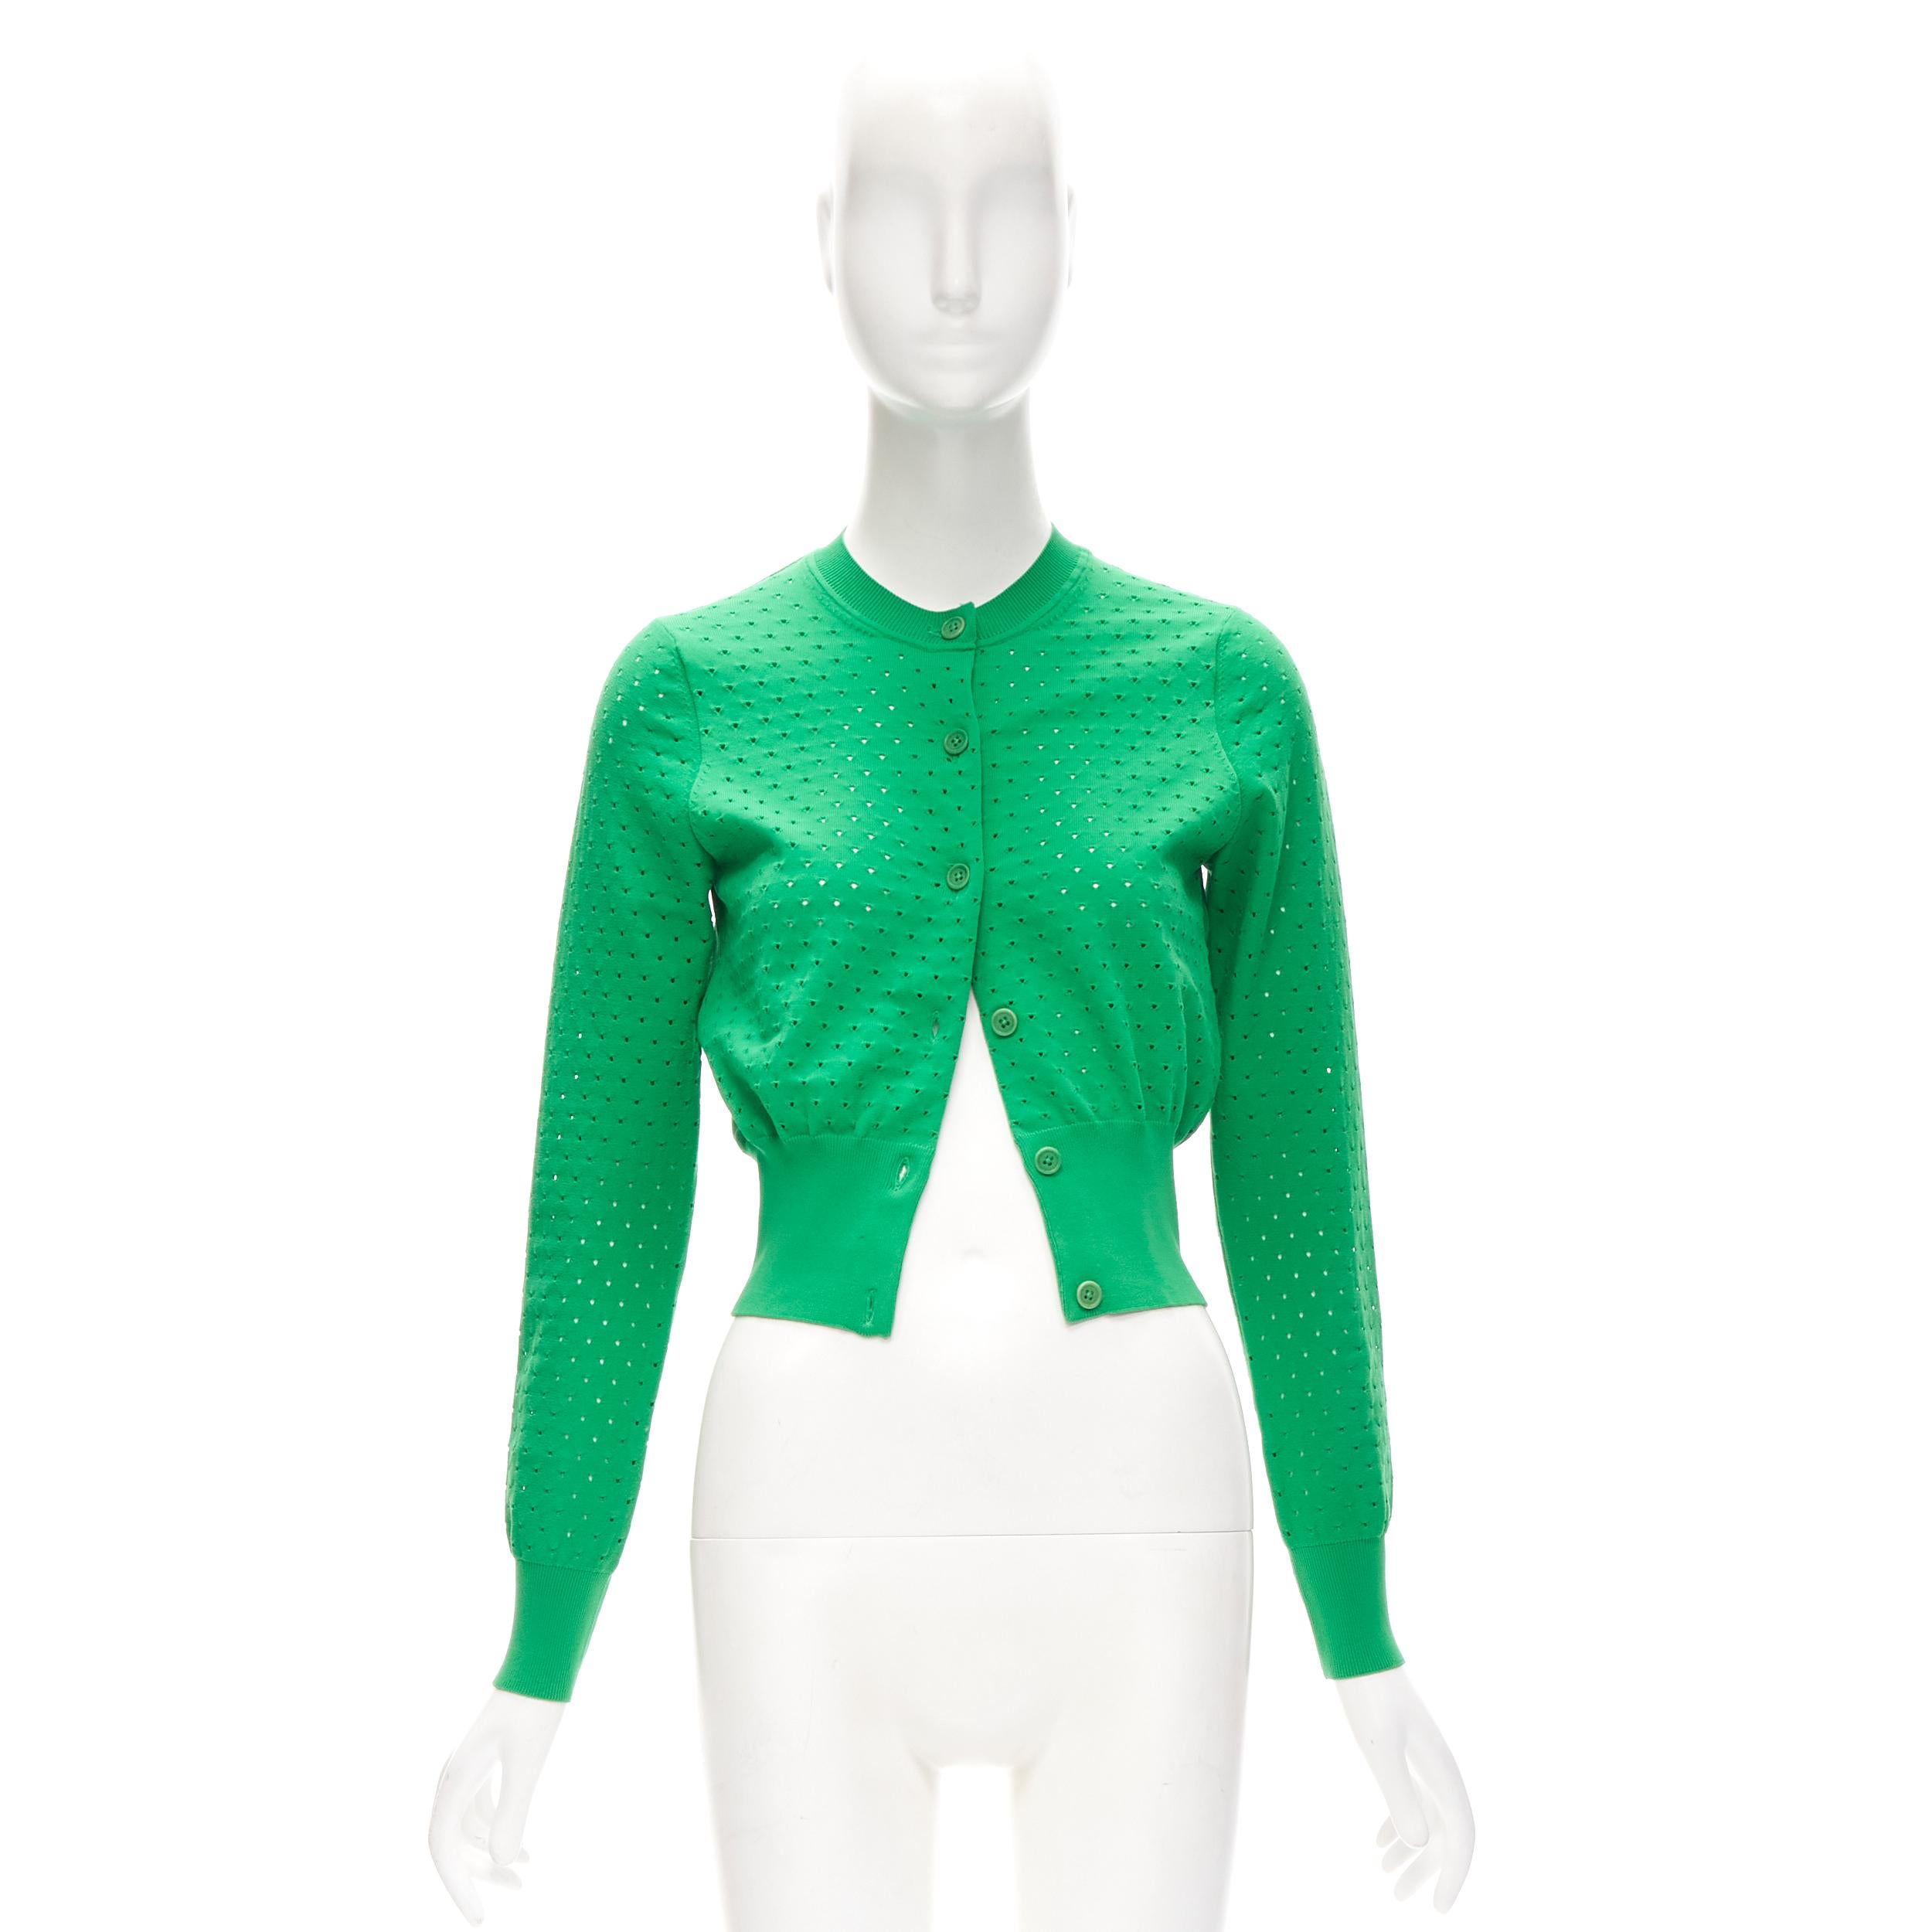 ACNE STUDIOS kelly green perforated cropped cardigan sweater S 3